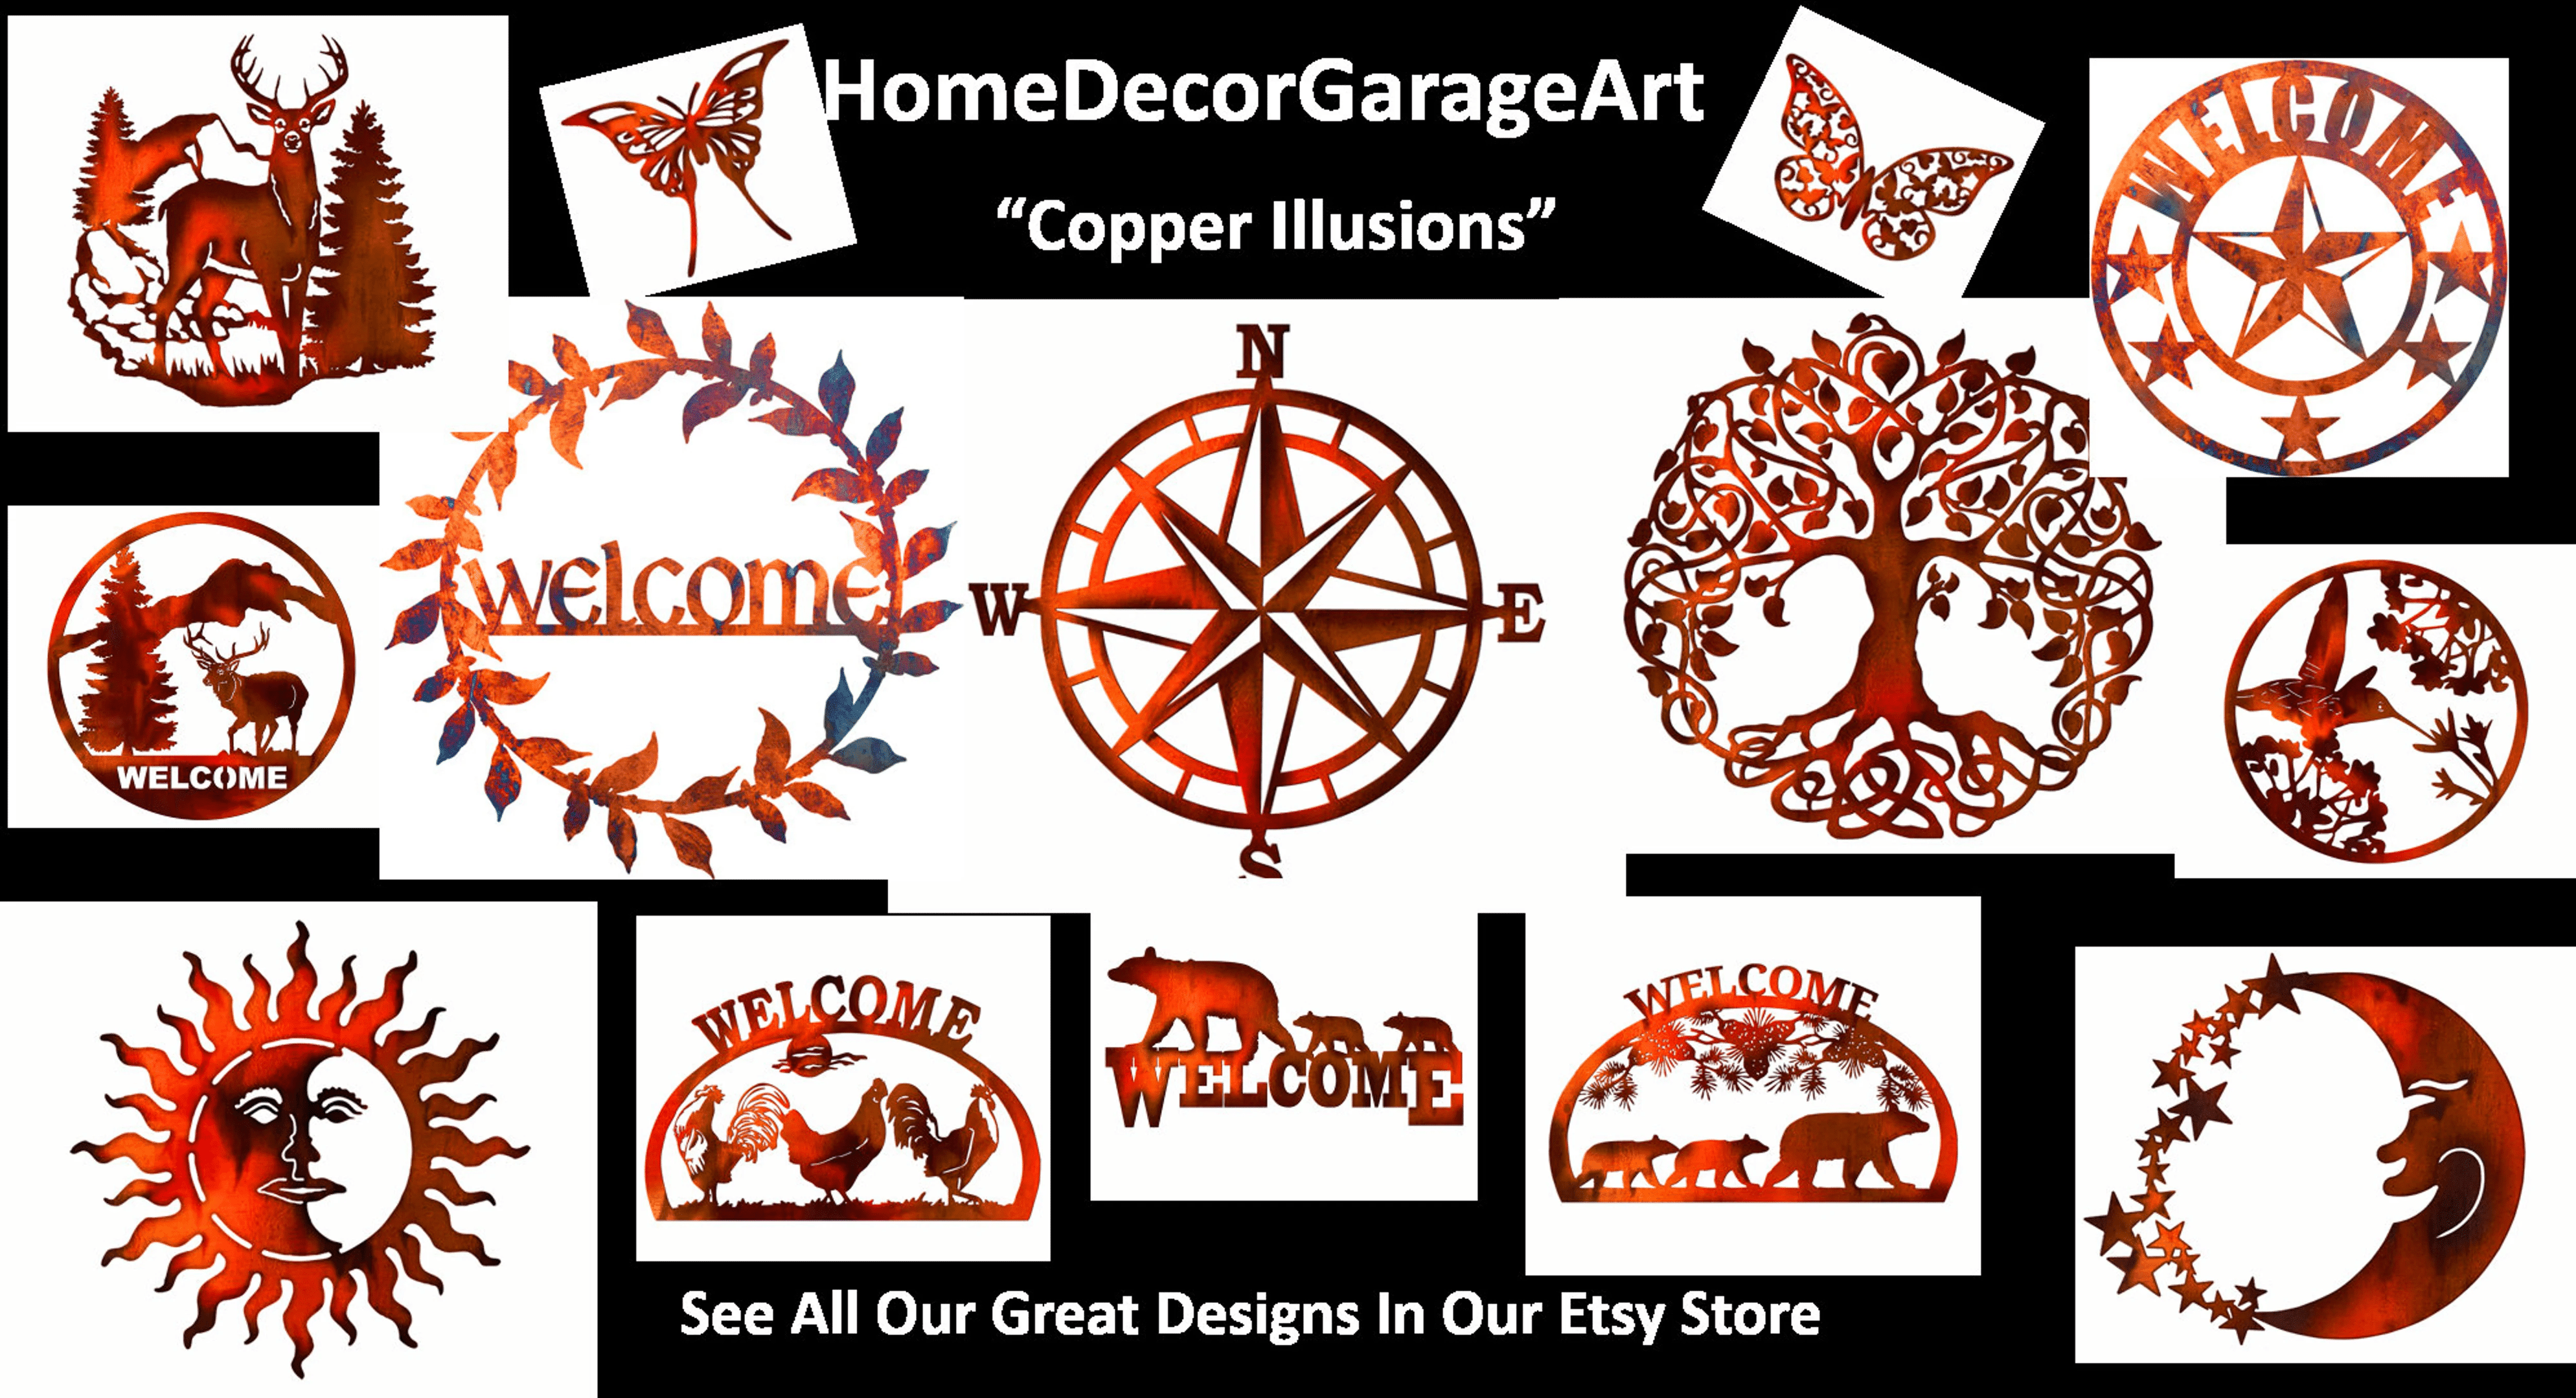 Lake Fish Copper Illusions Laser Cut Out Sign With Copper Illusions Finish Silhouette Metal Art Sign Wall Decor Art RG